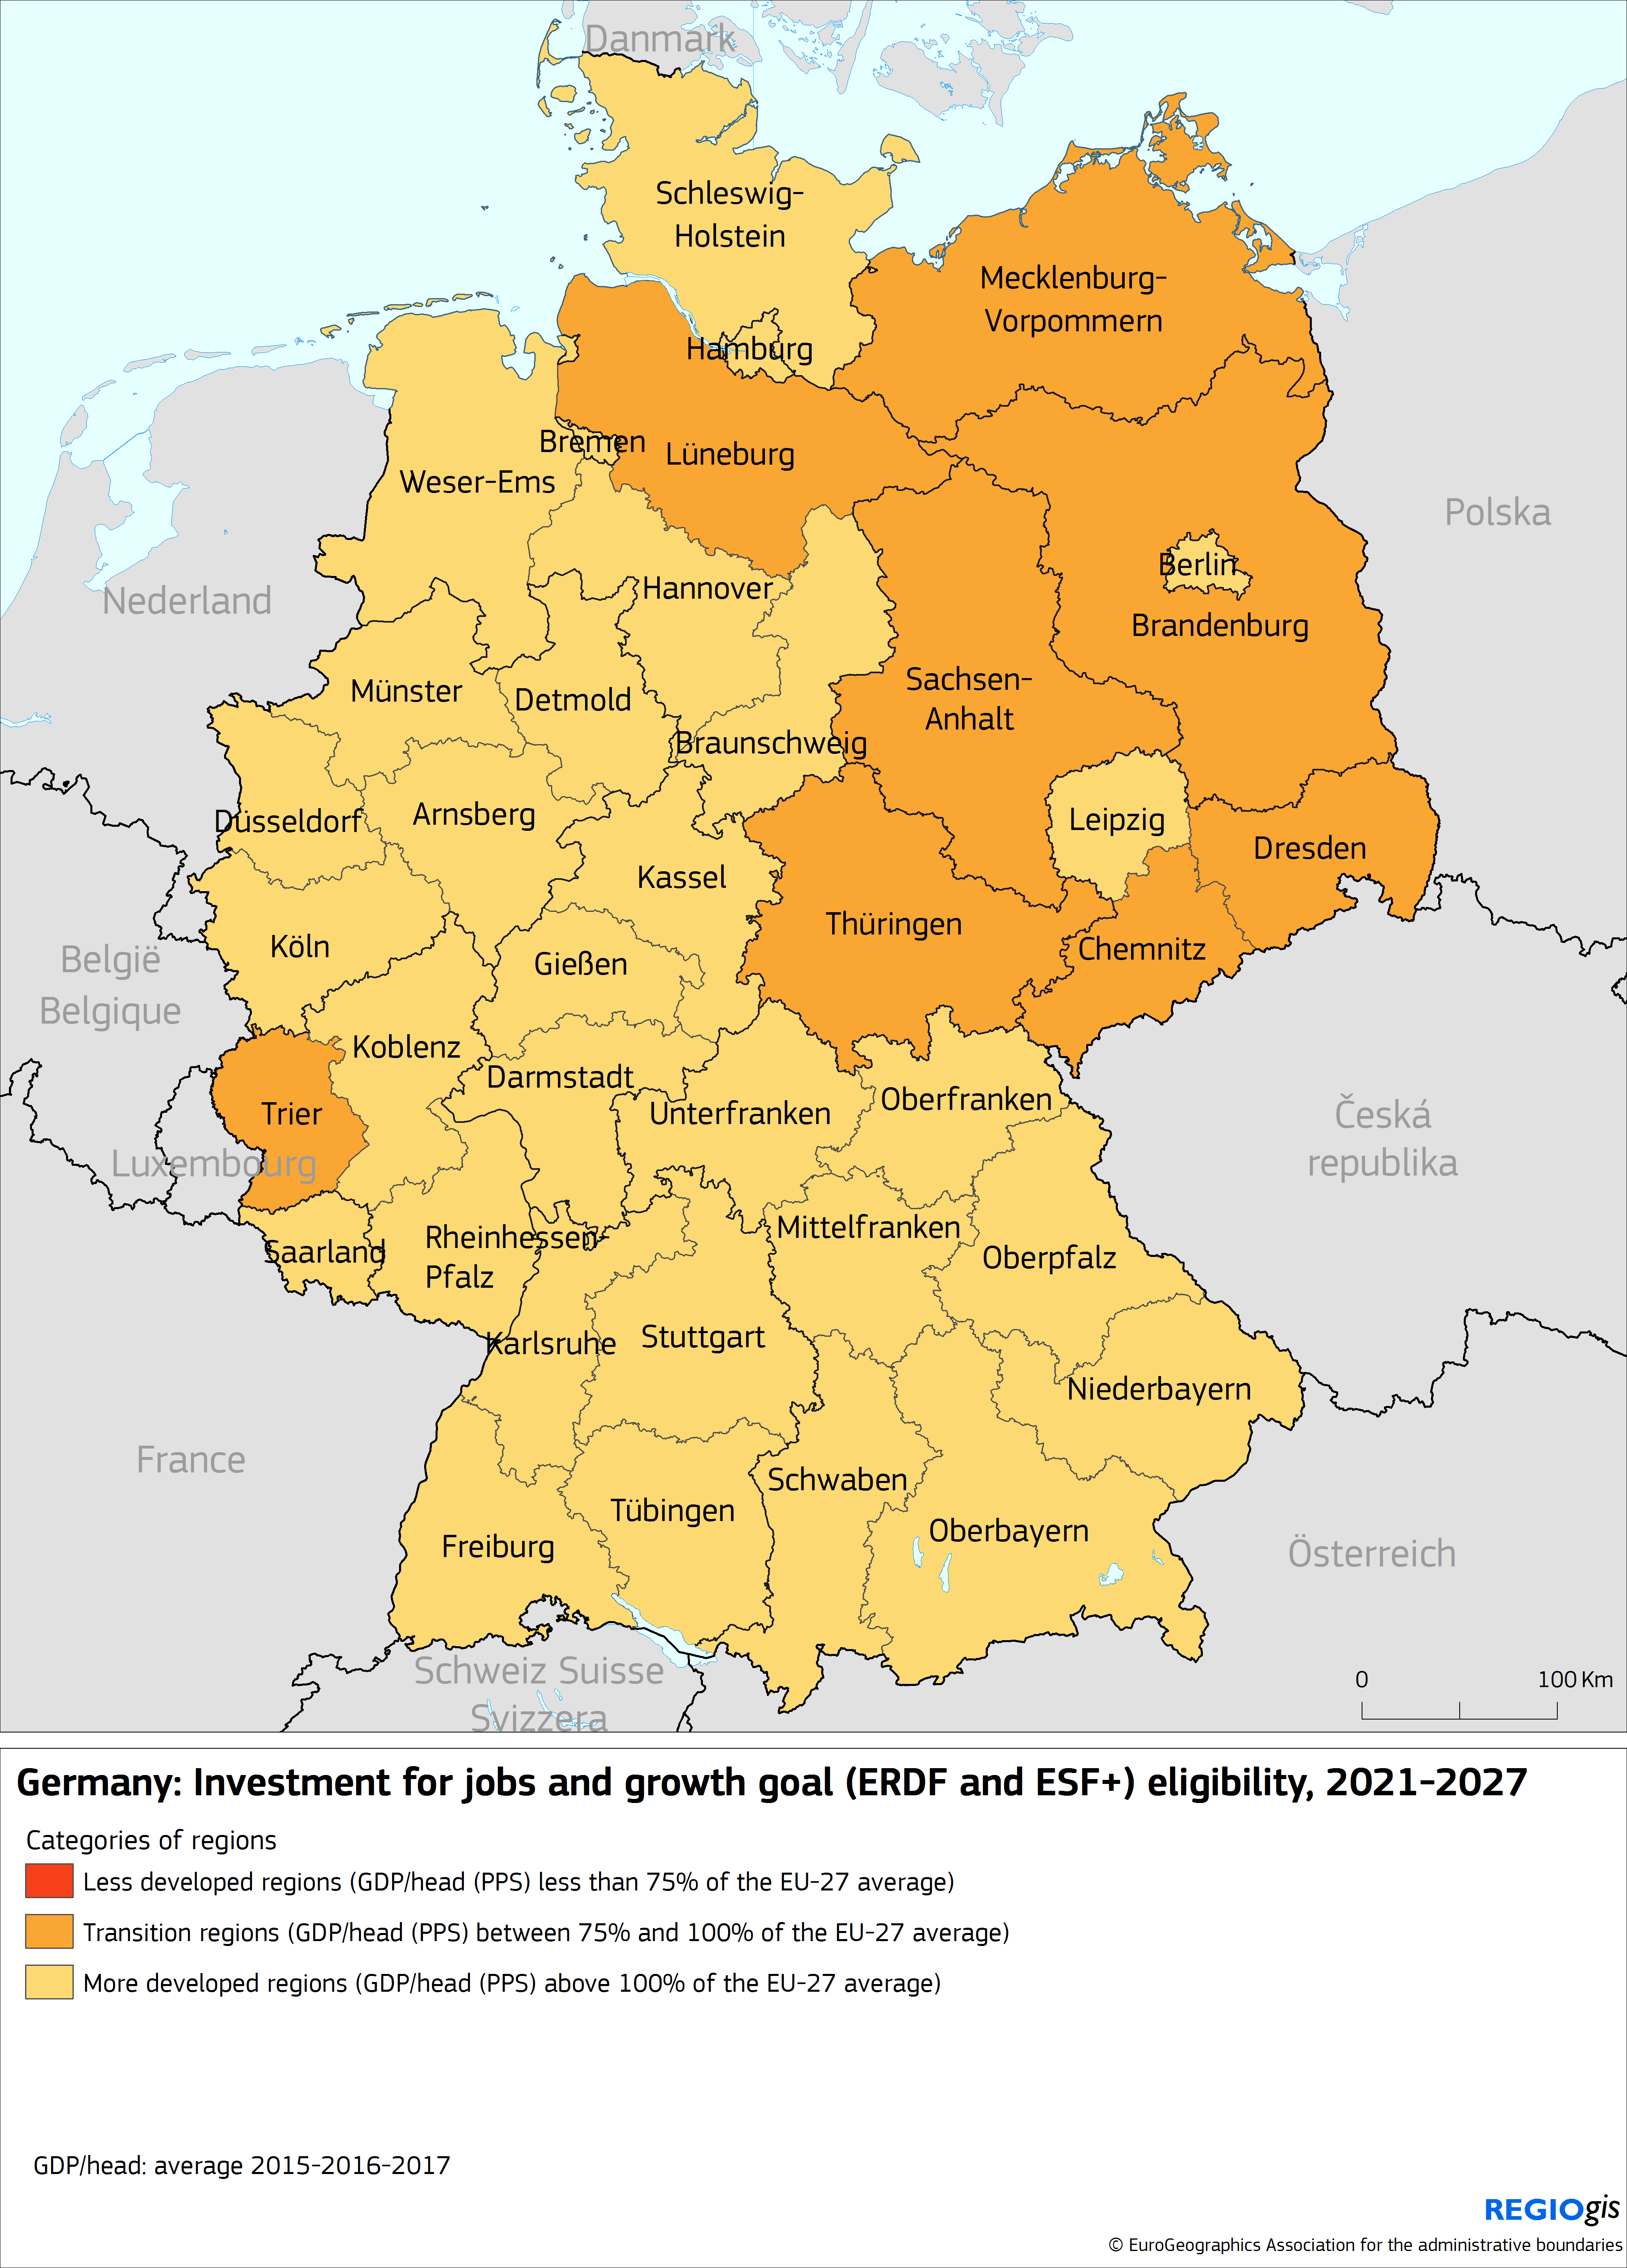 Structural Funds 2021-2027 (ERDF and ESF) eligibility: Germany